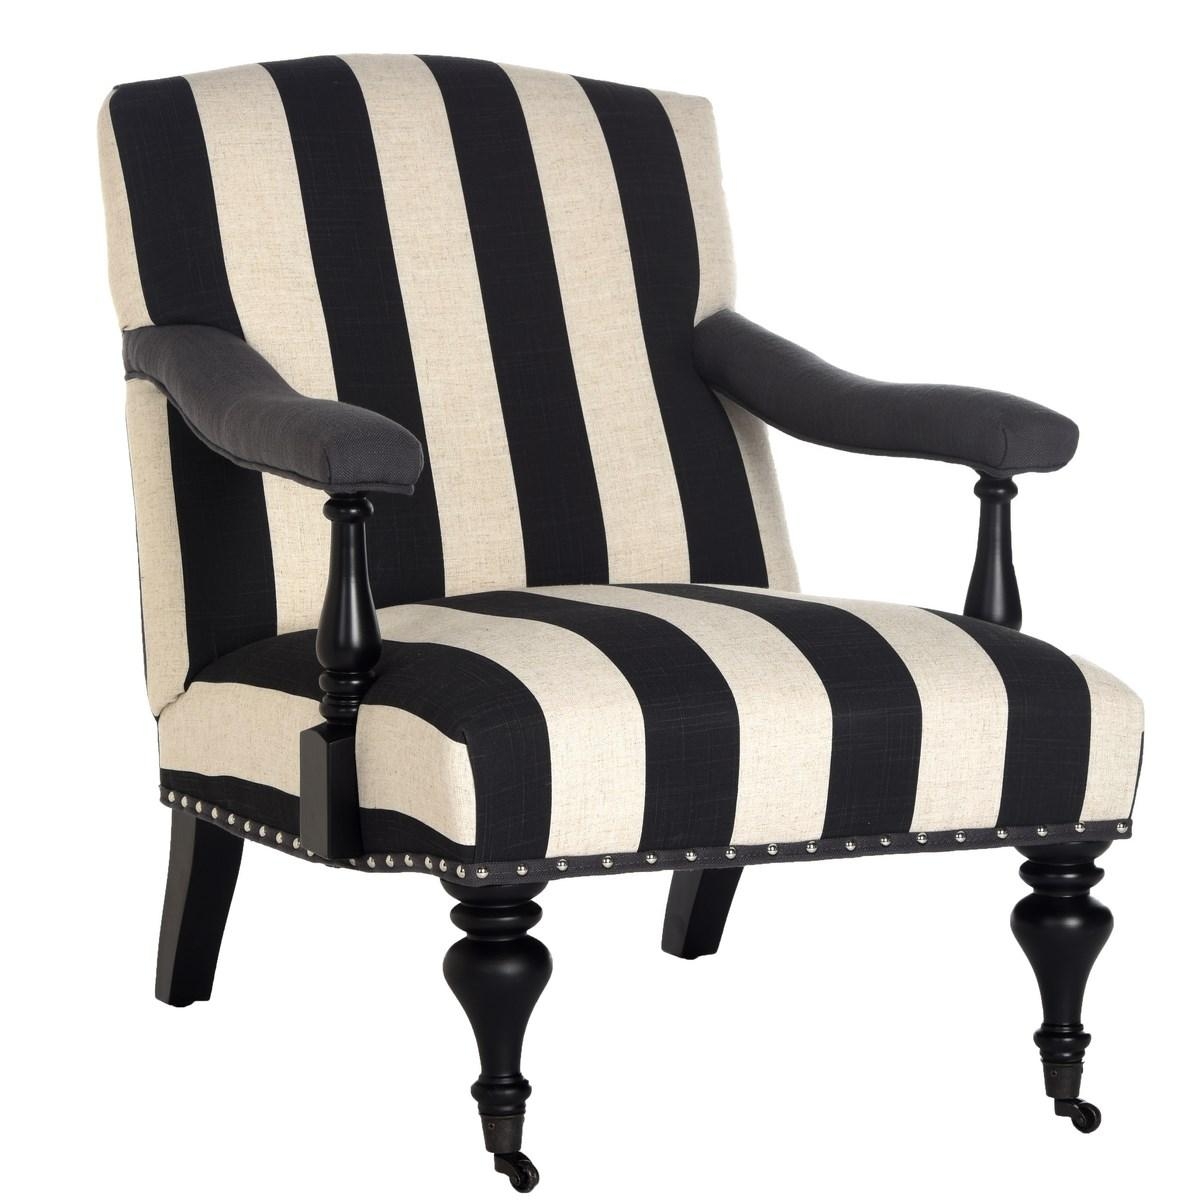 Devona Awning Stripe Arm Chair - Silver Nail Heads - Charcoal/White - Arlo Home - Image 1